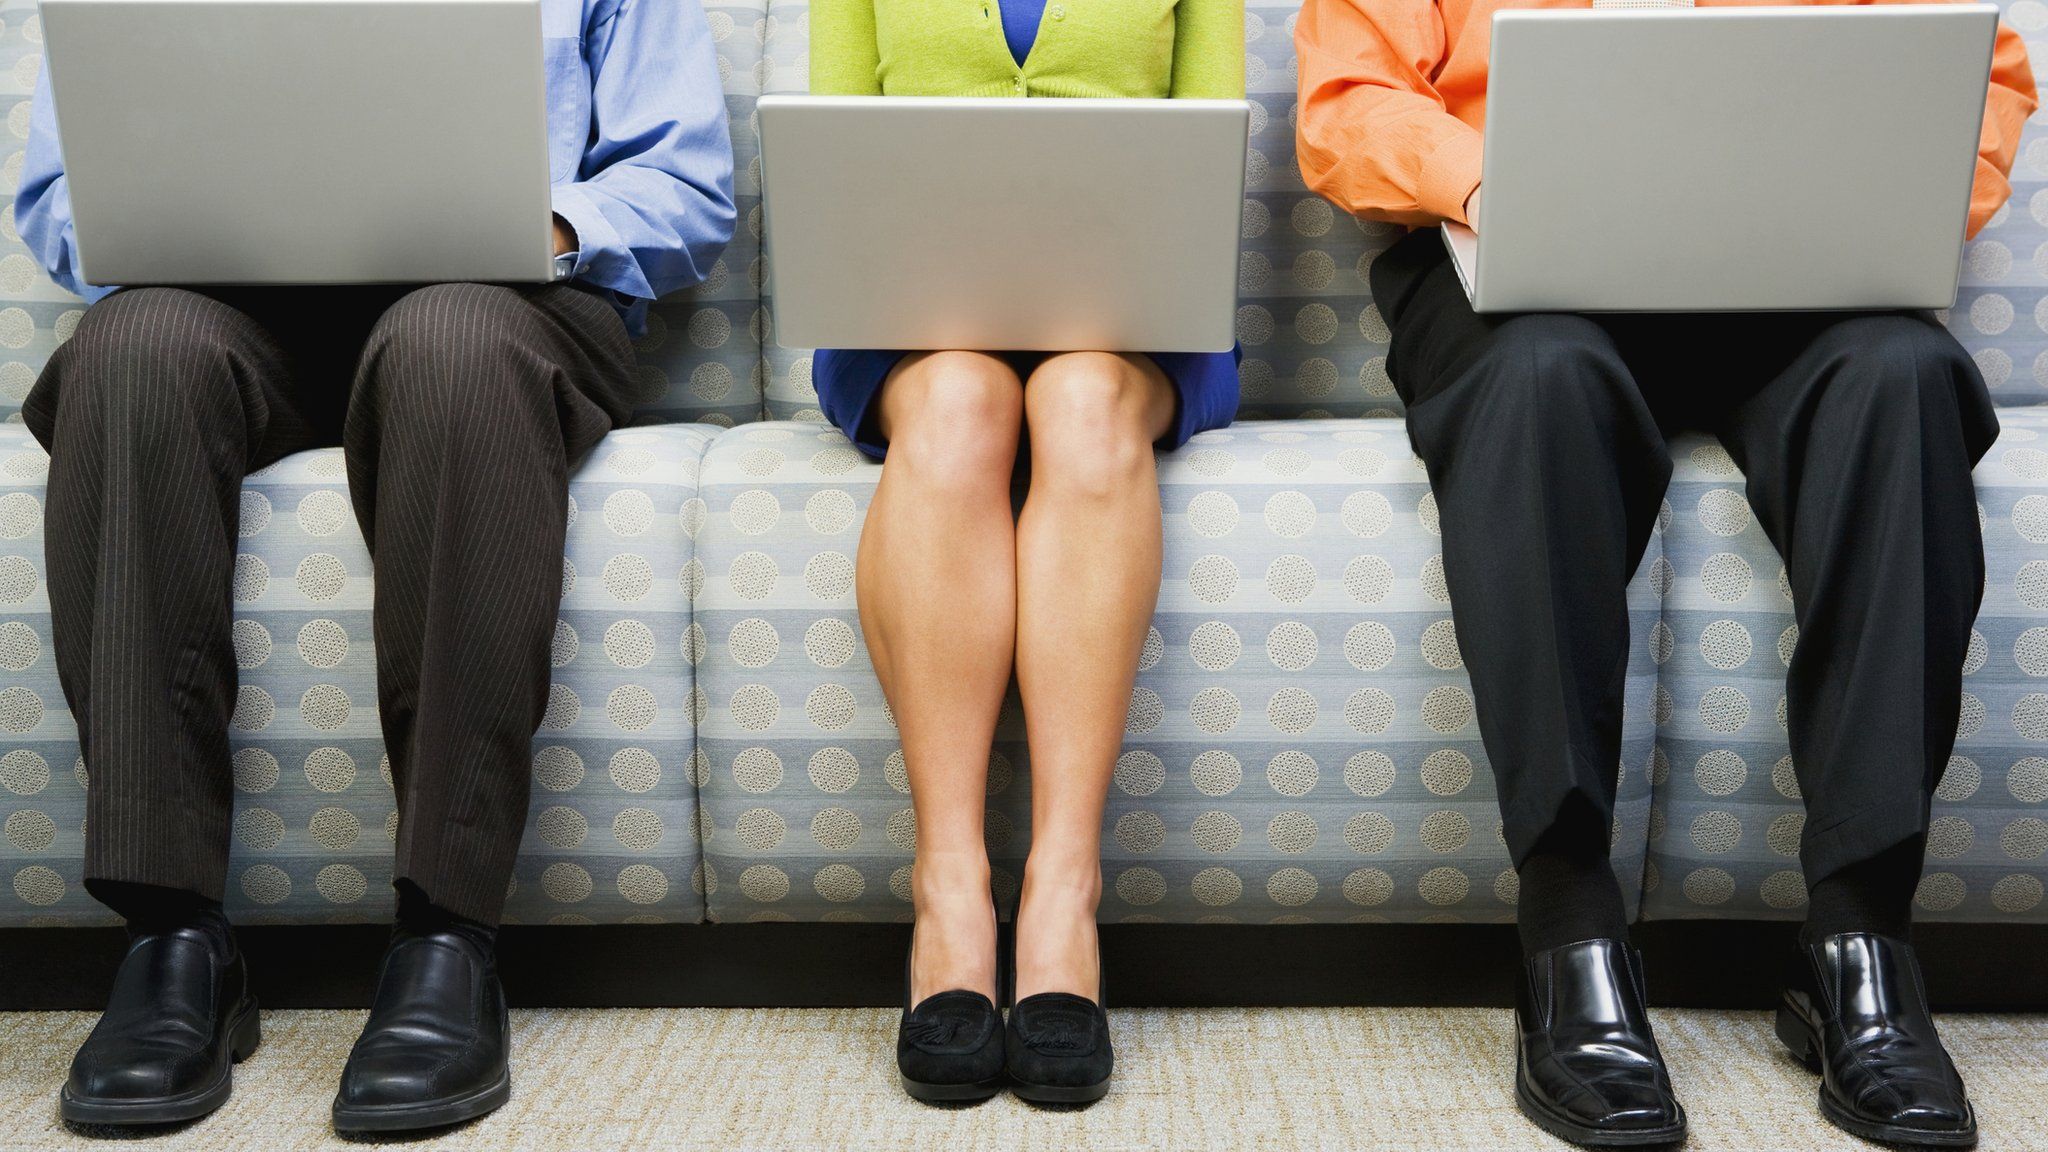 Men and a woman with laptops